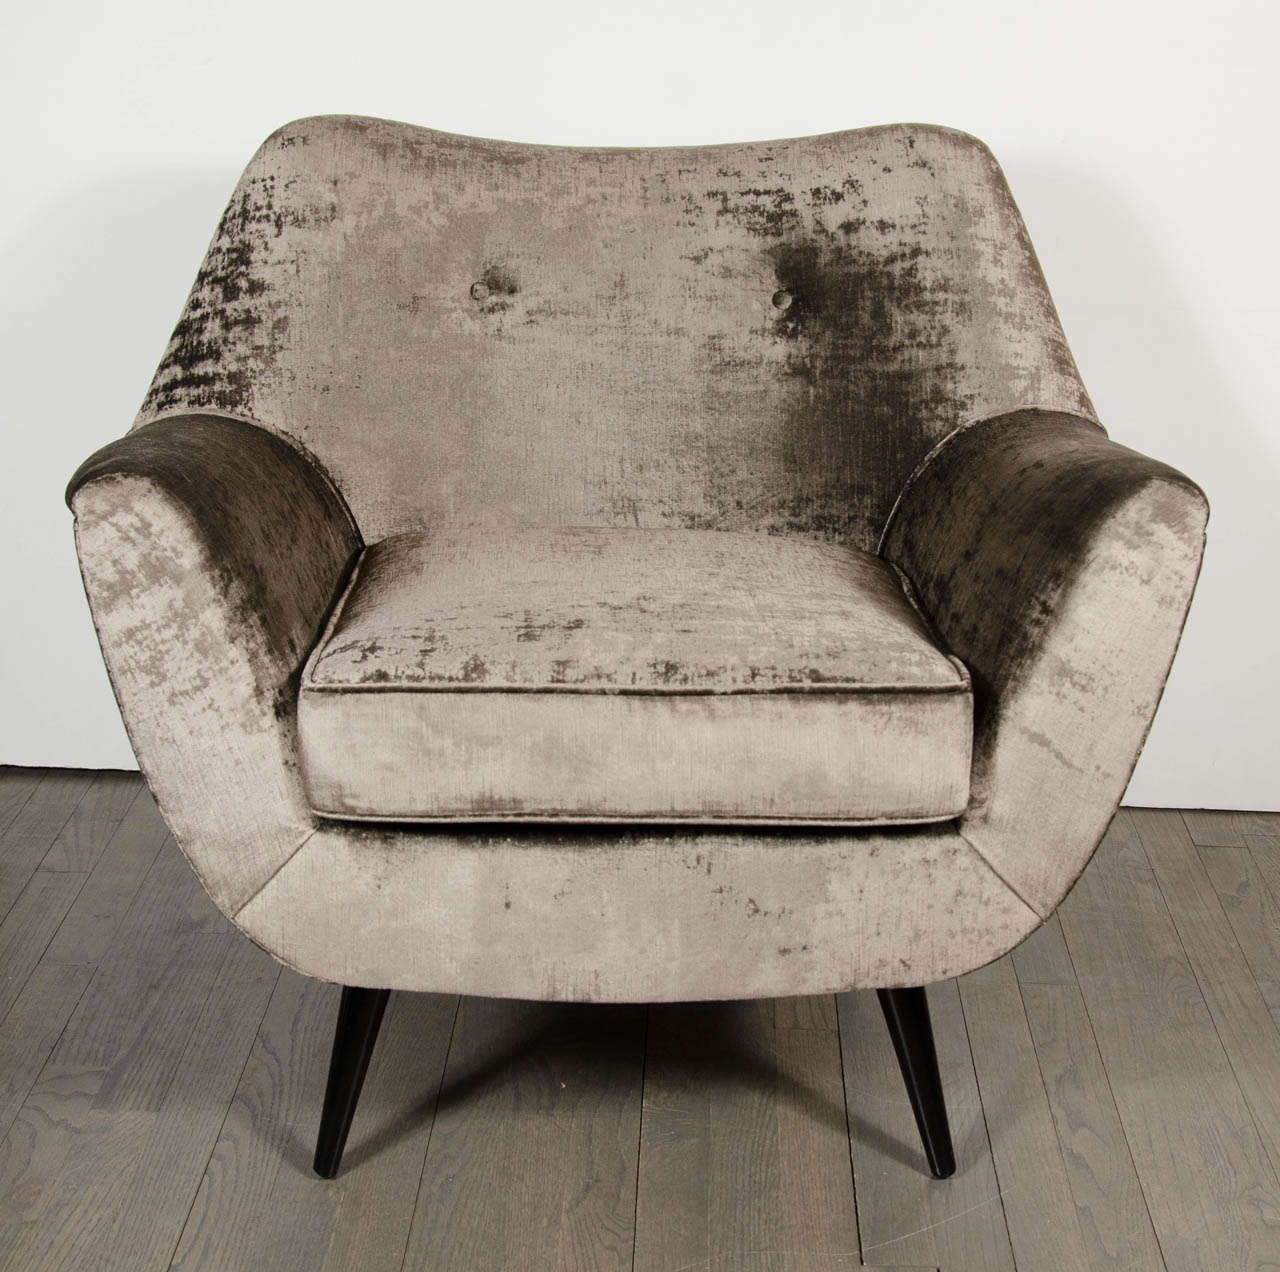 This outstanding Mid-Century Modernist Chair consists of an organic design, splayed conical legs in ebonized walnut and dual button back detail. Newly upholstered in lux grey velvet. Restored to mint condition.